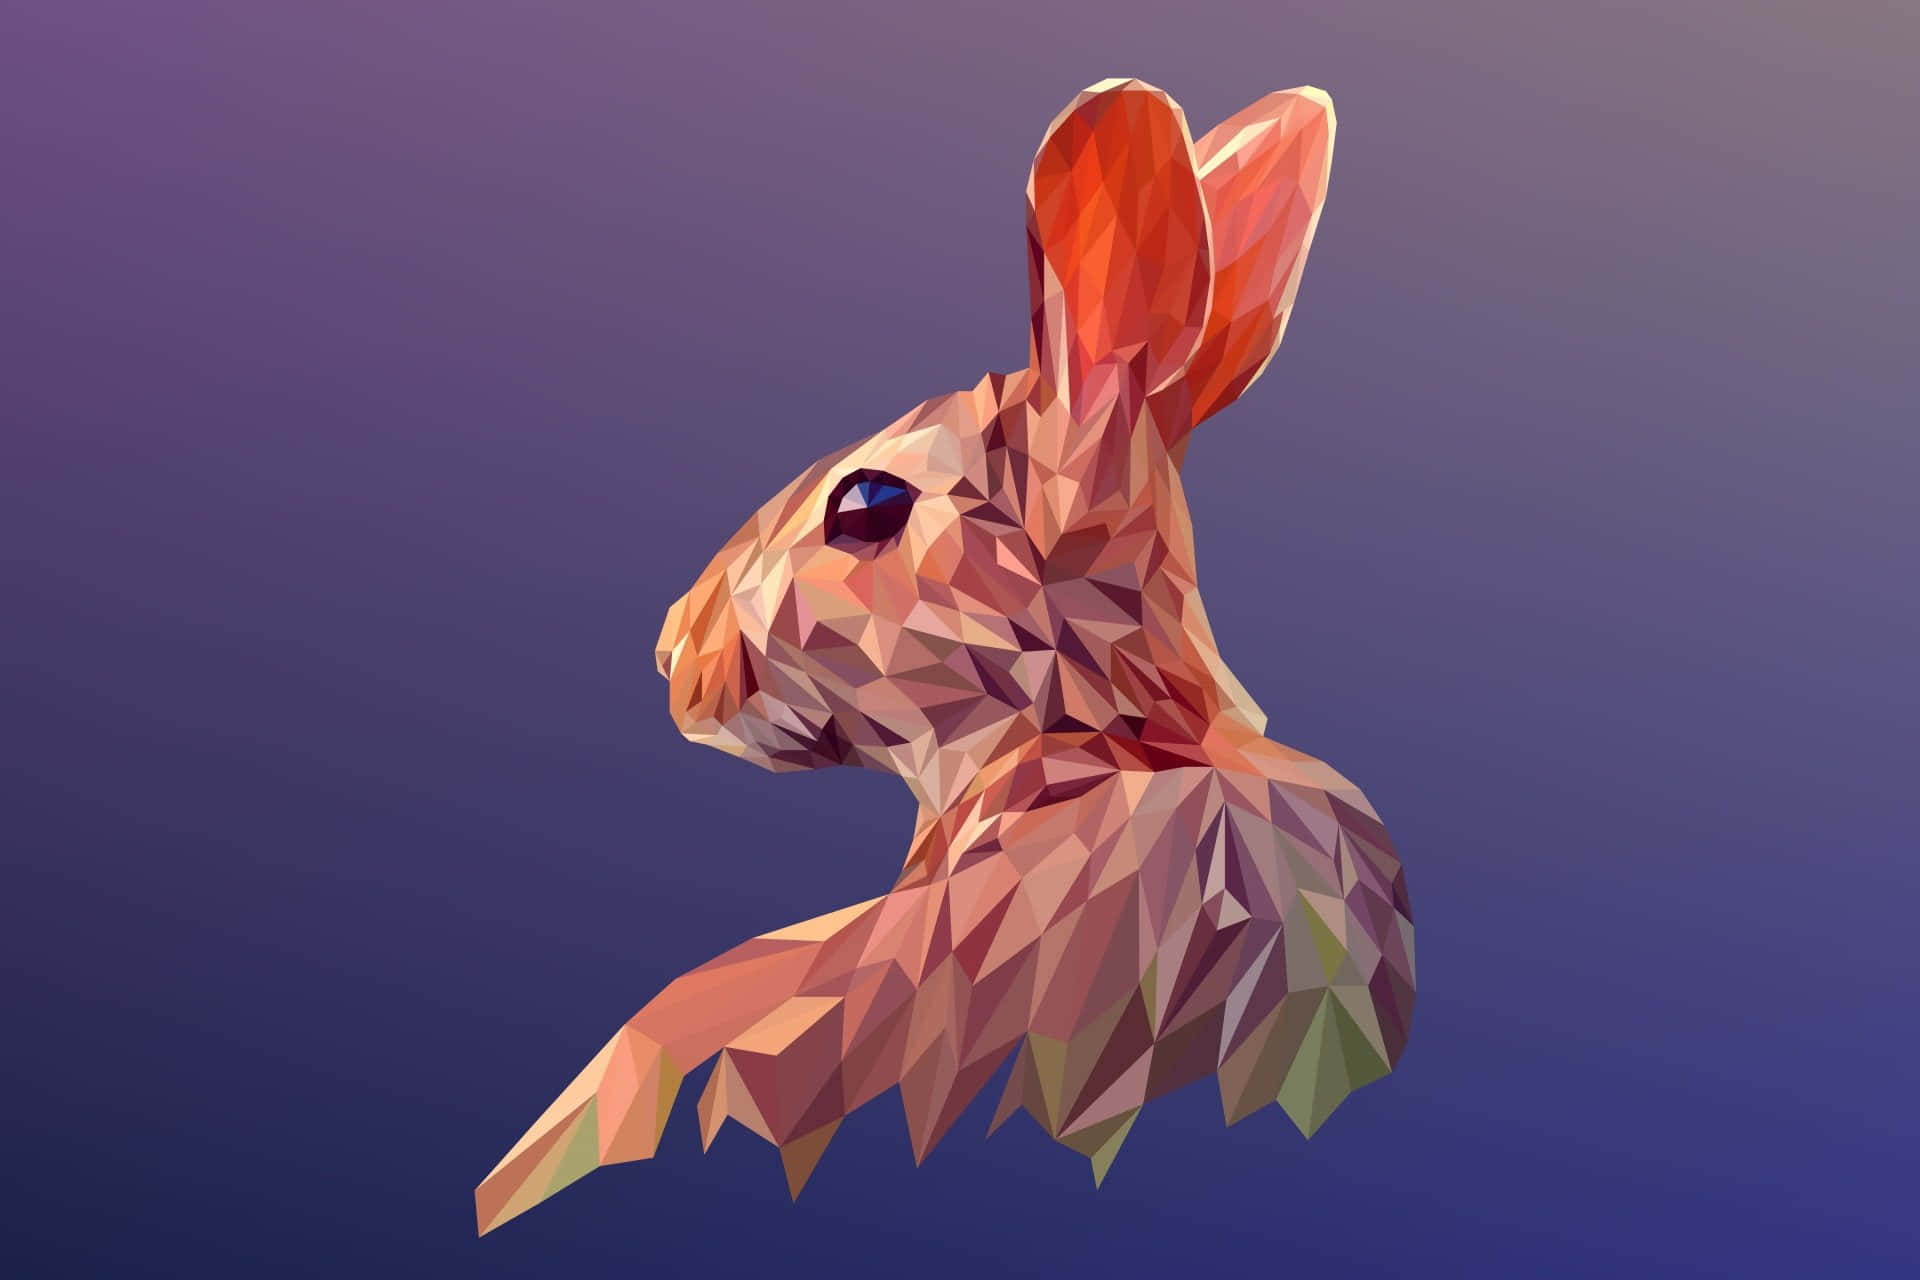 A Rabbit In A Low Polygonal Style